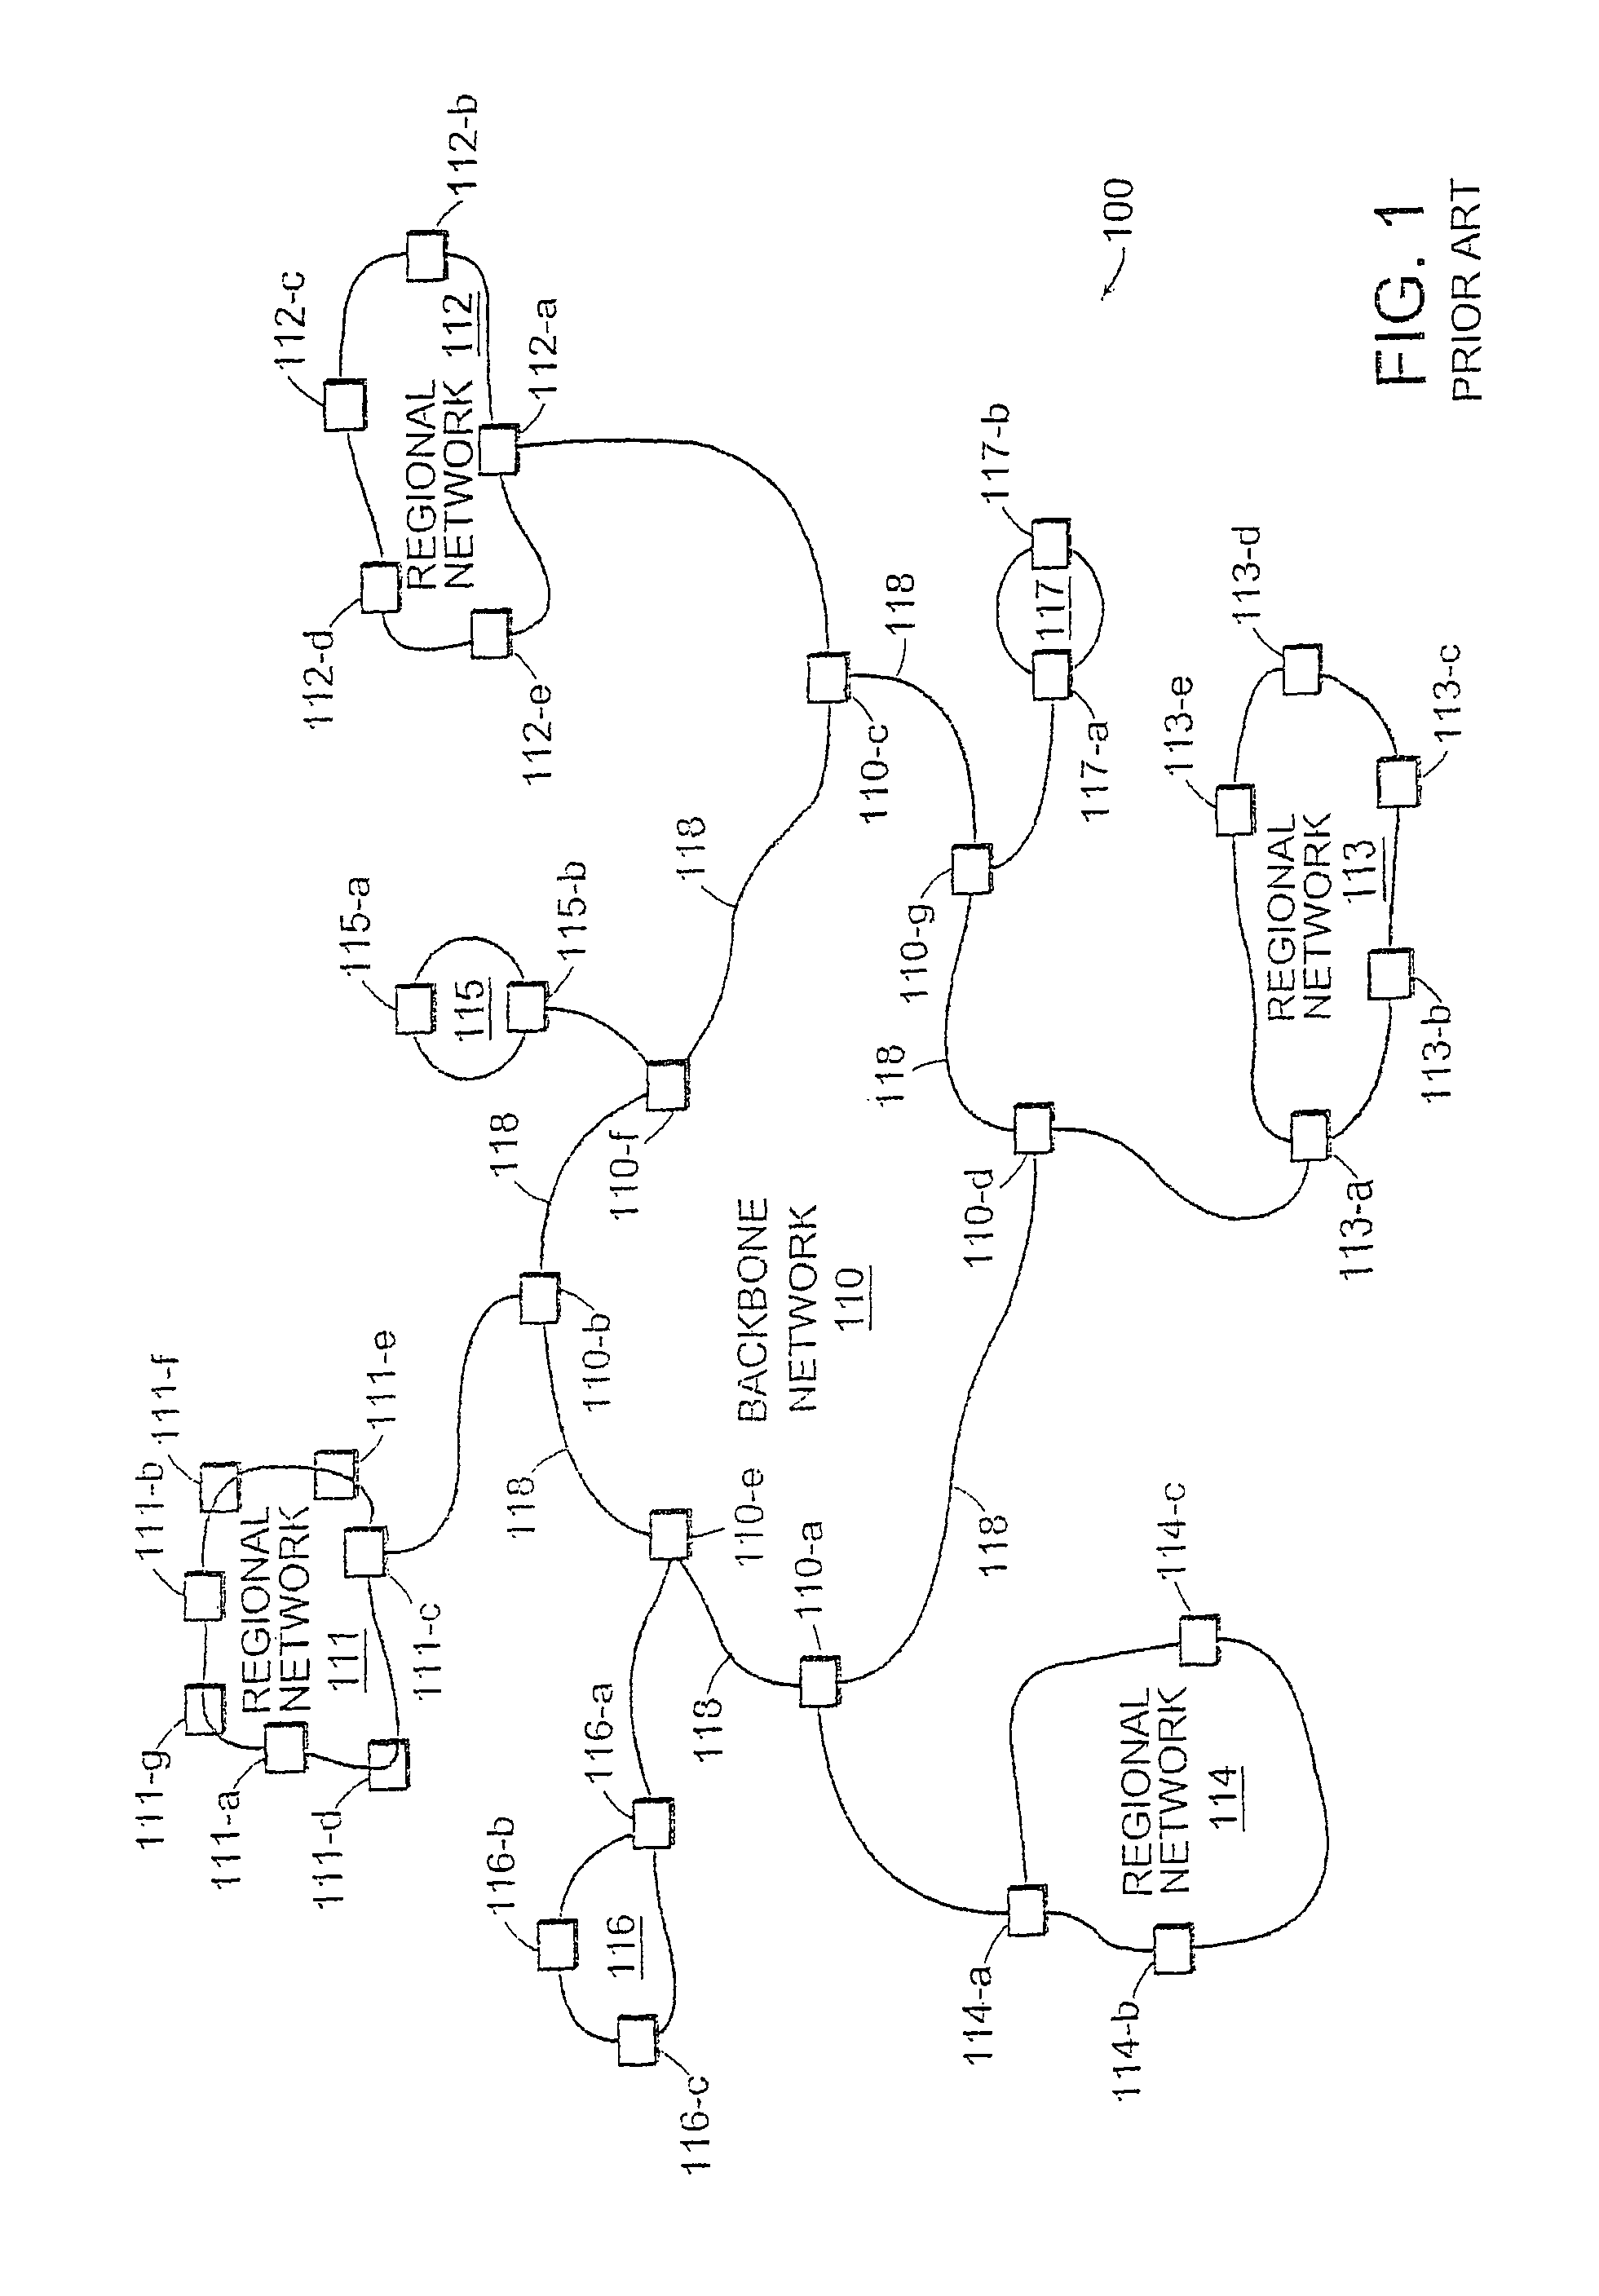 Method and apparatus providing a graphical user interface for representing and navigating hierarchical networks